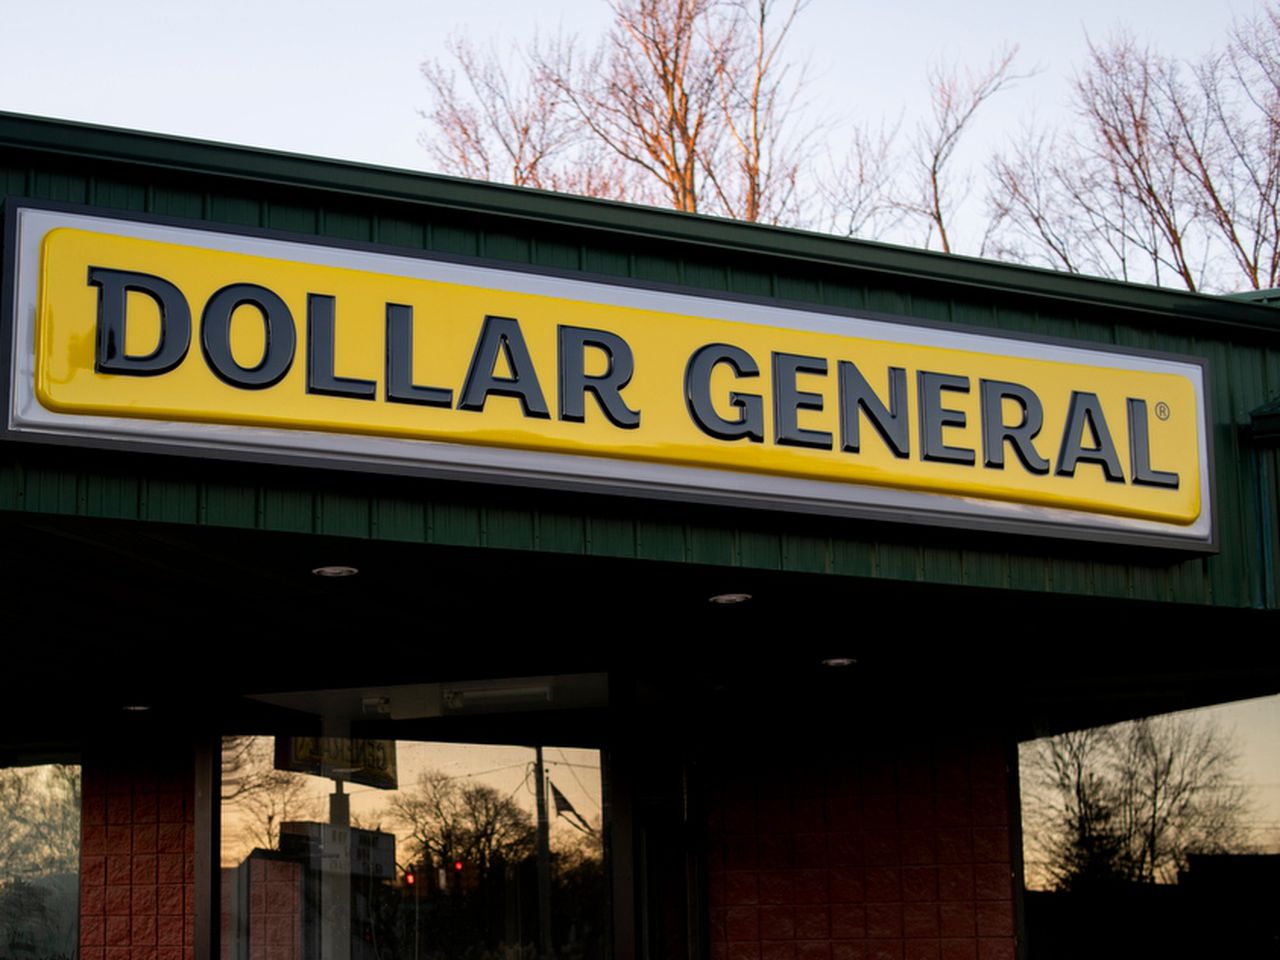 Dollar General faces another $1.68 million in fines for safety violations in Alabama, Florida and Georgia